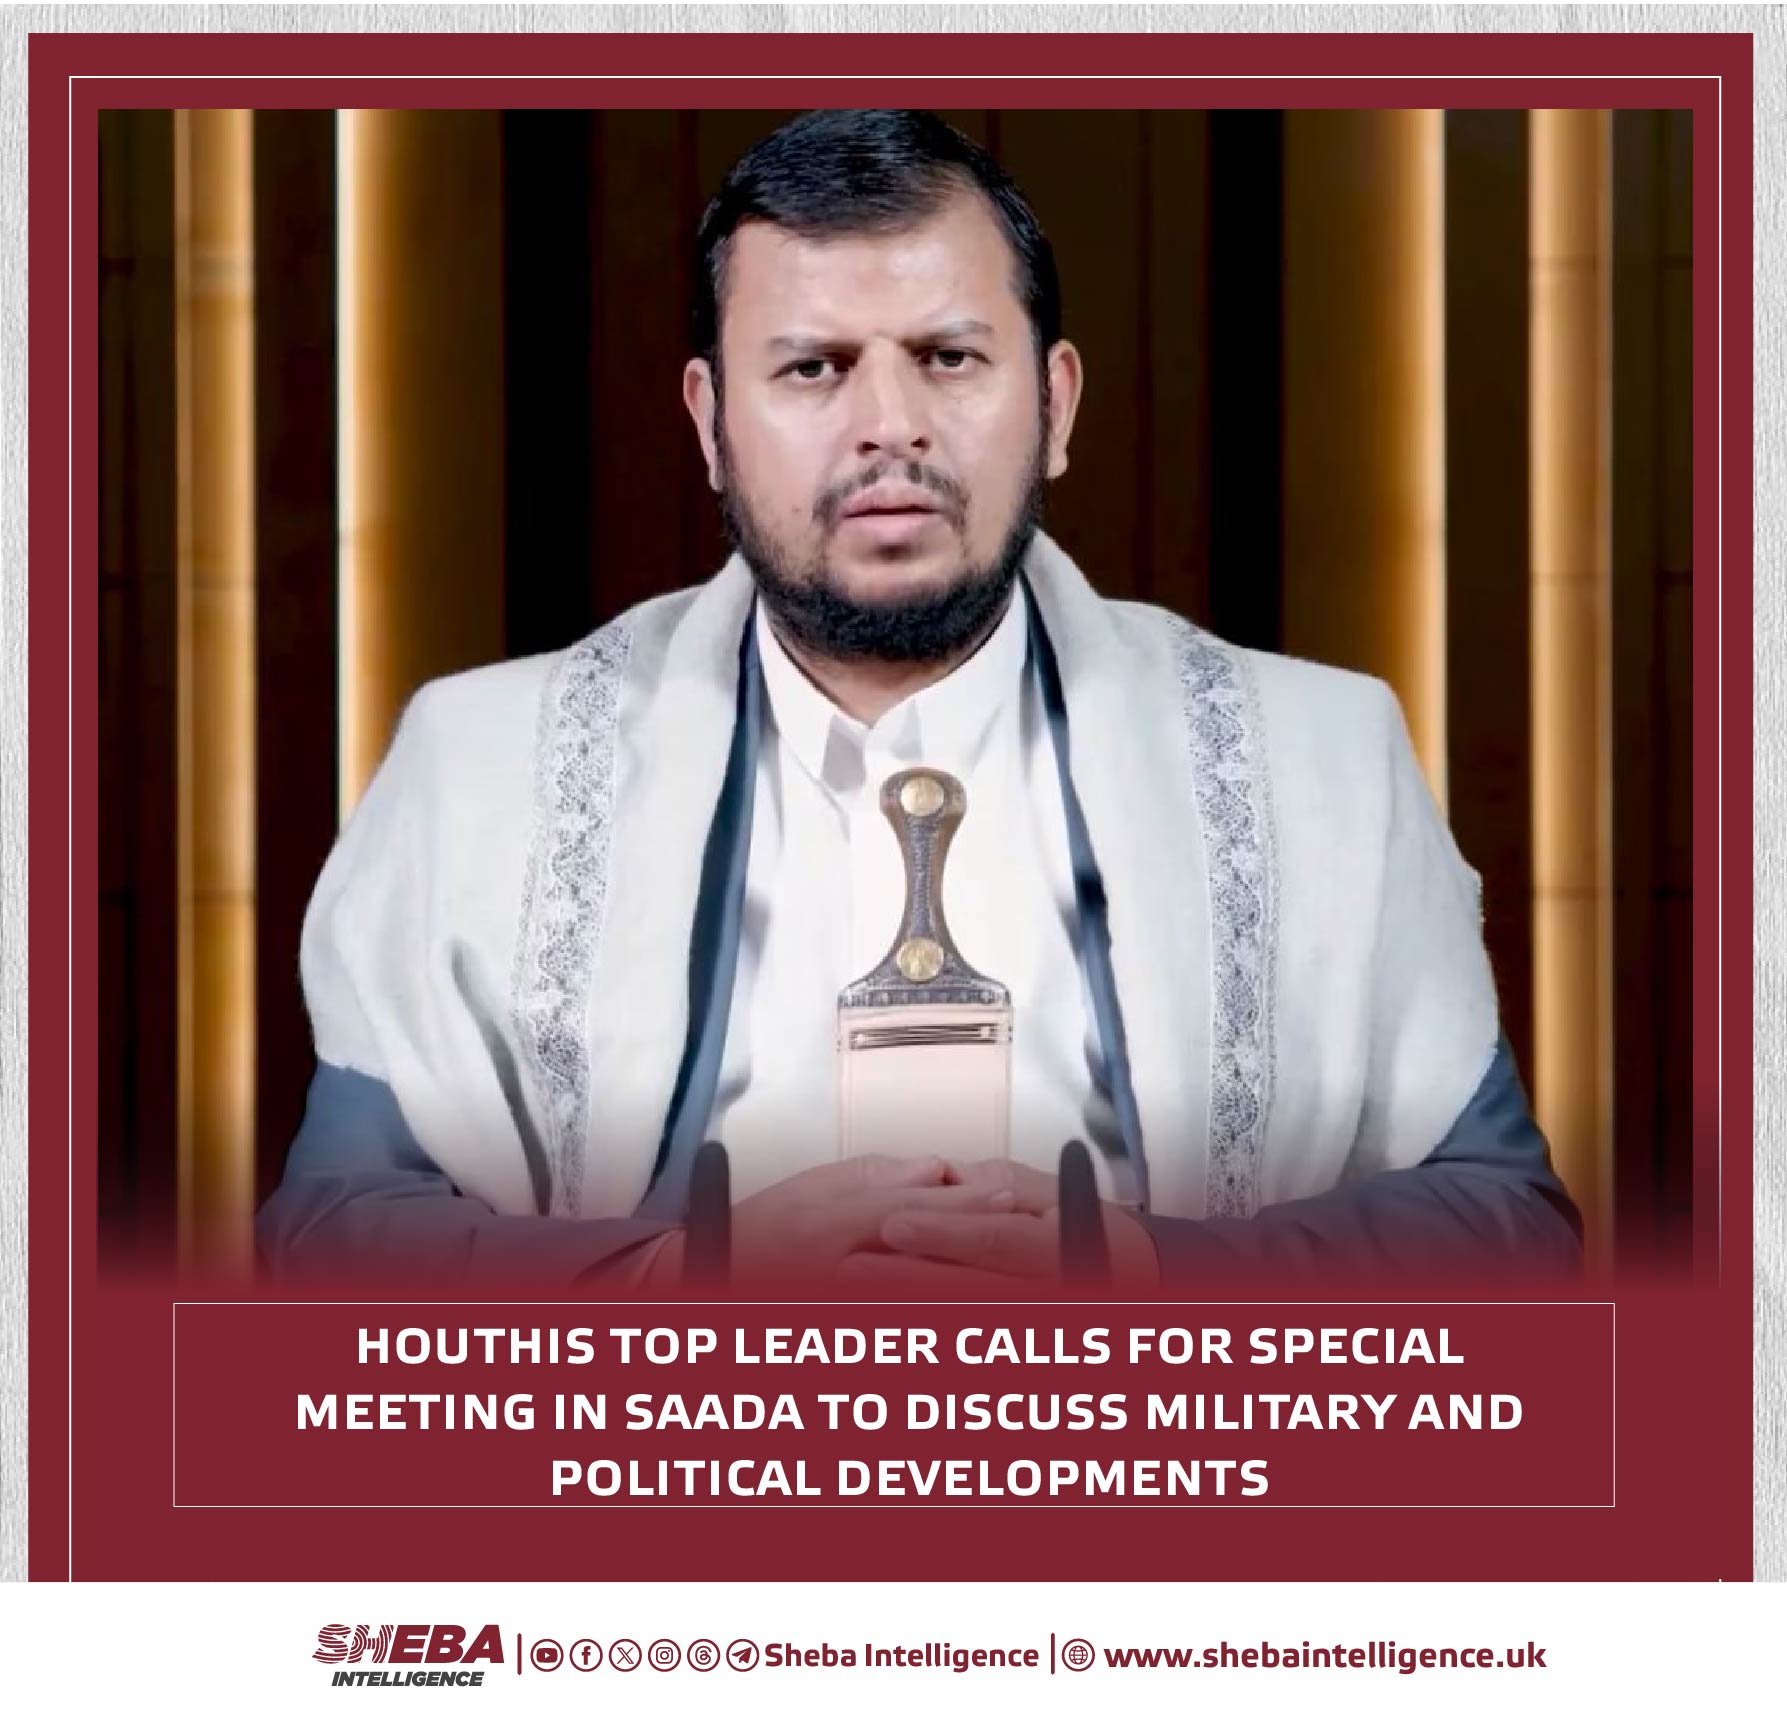 Houthis Top Leader Calls for Special Meeting in Saada to Discuss Military and Political Developments